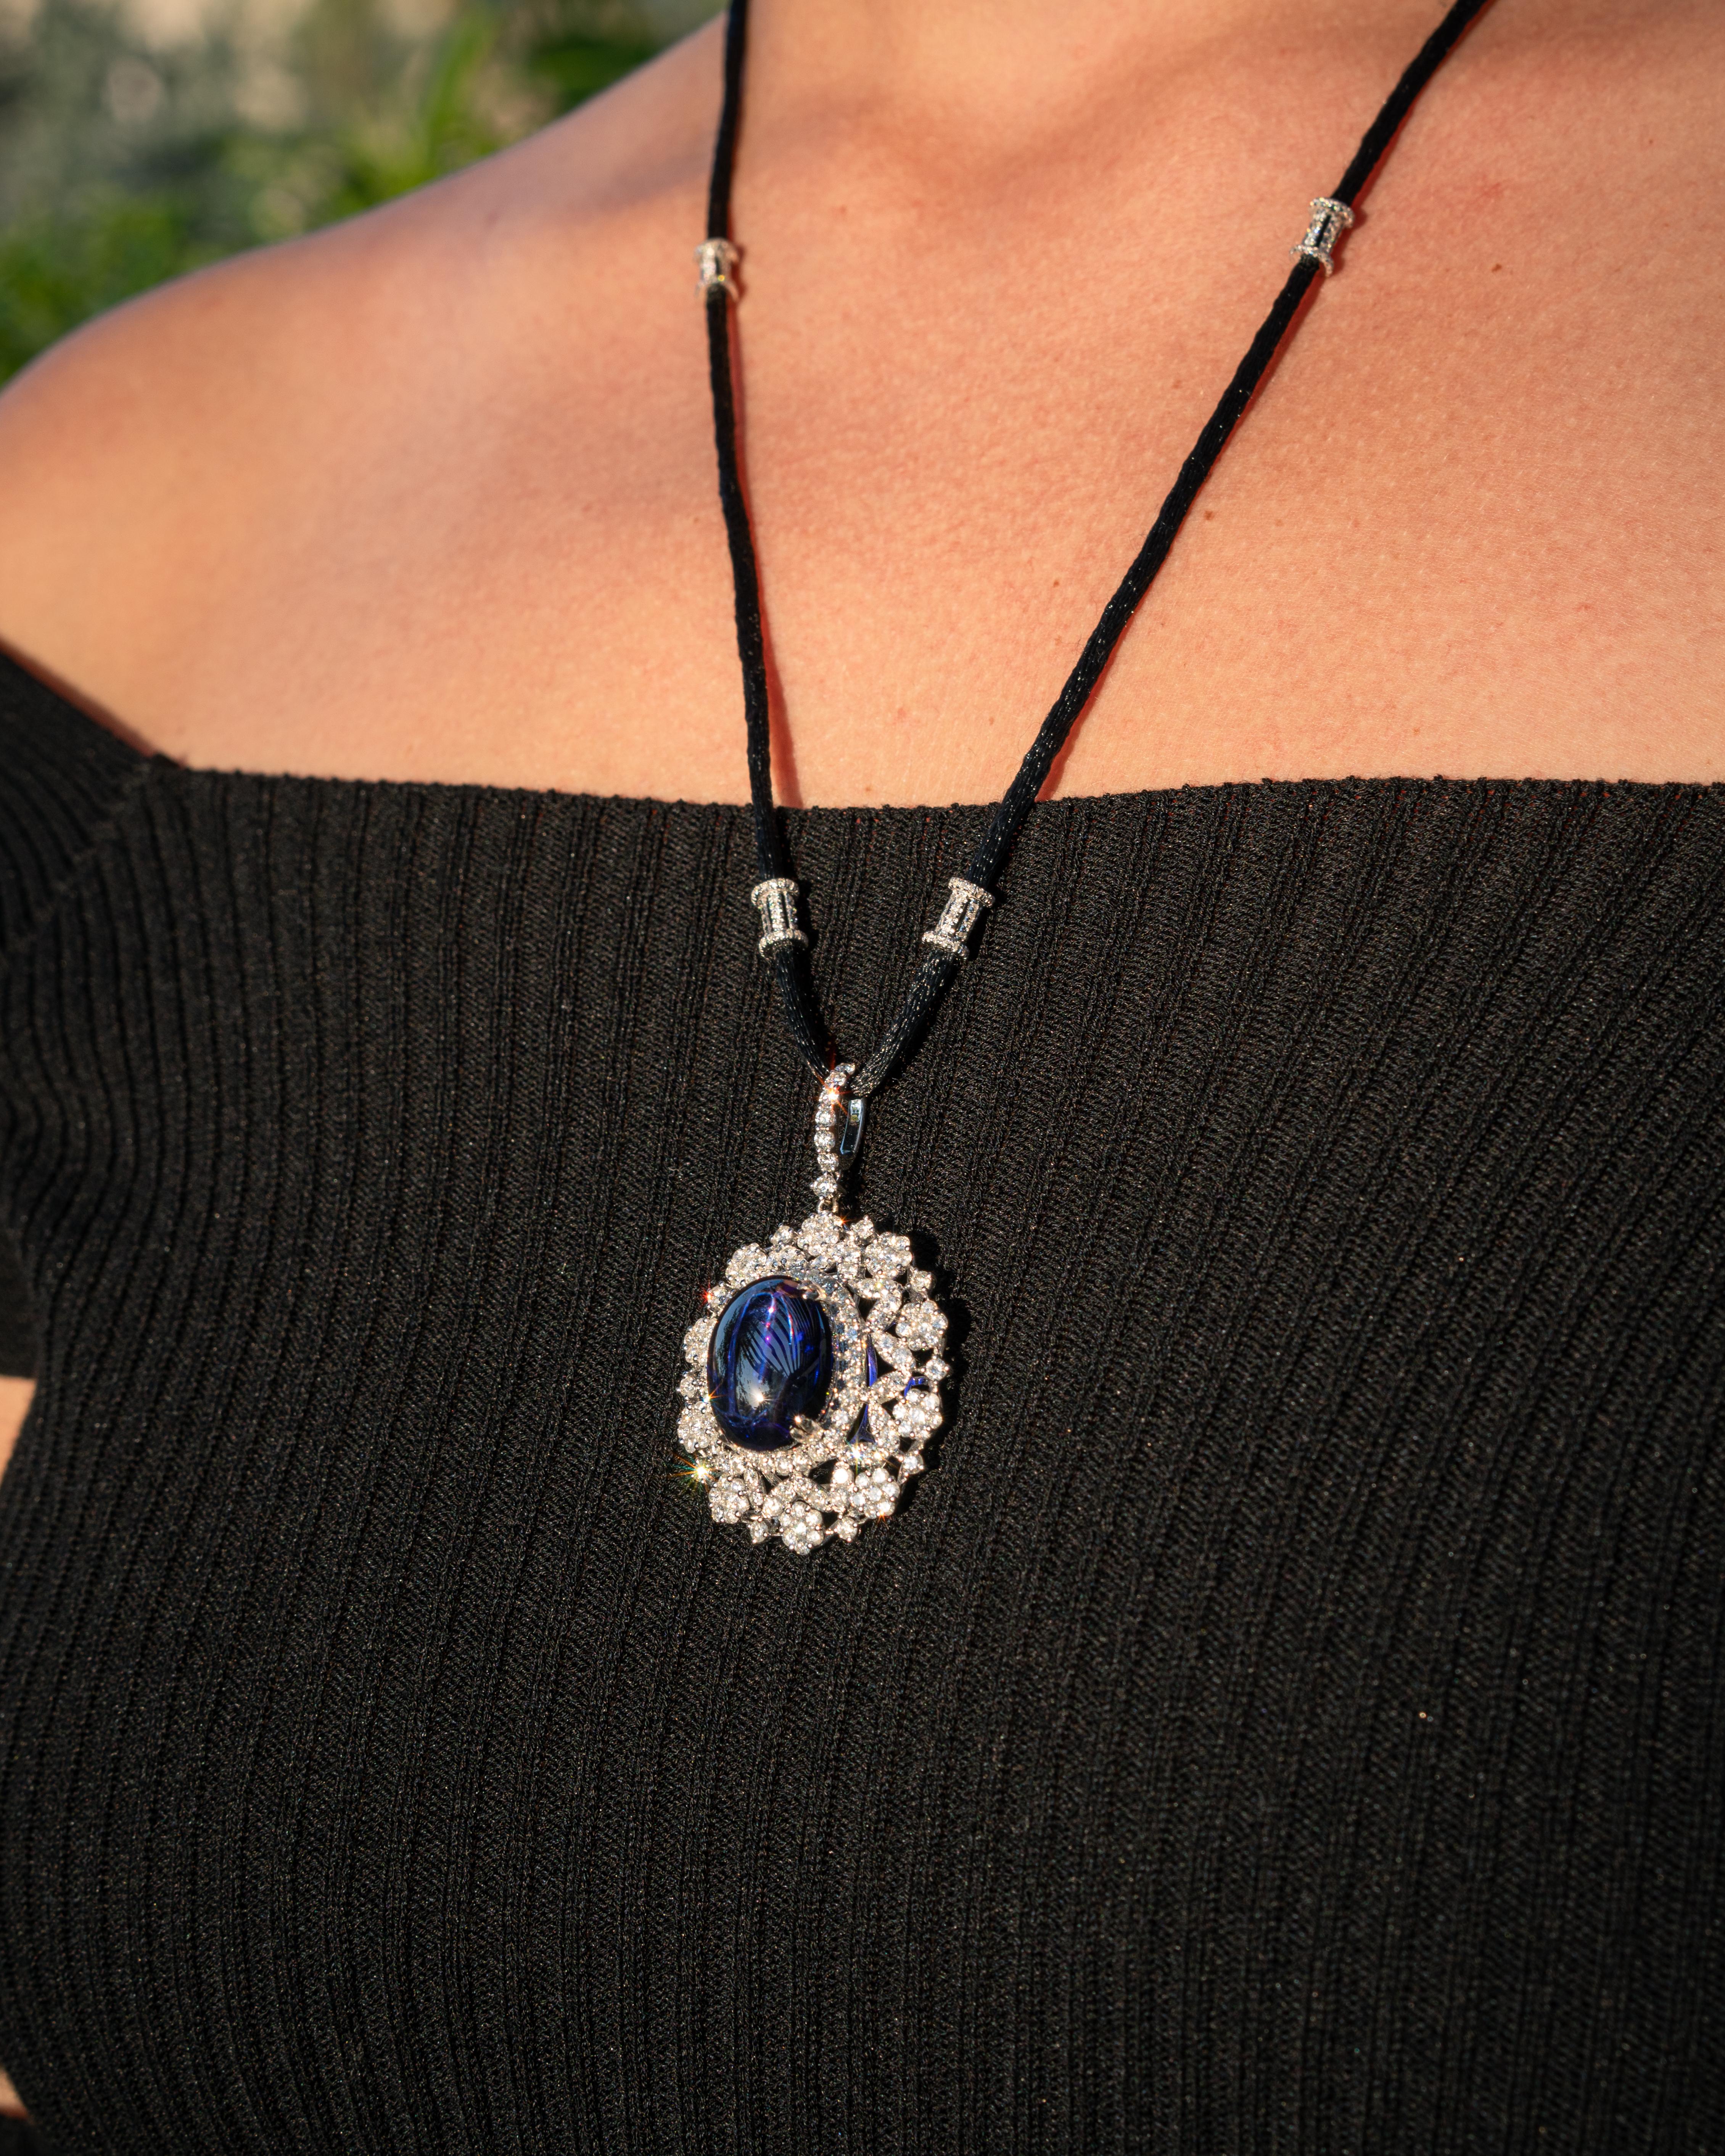 22.12 Carat Tanzanite Cabochon and Diamond Pendant Necklace In New Condition For Sale In Bangkok, Thailand